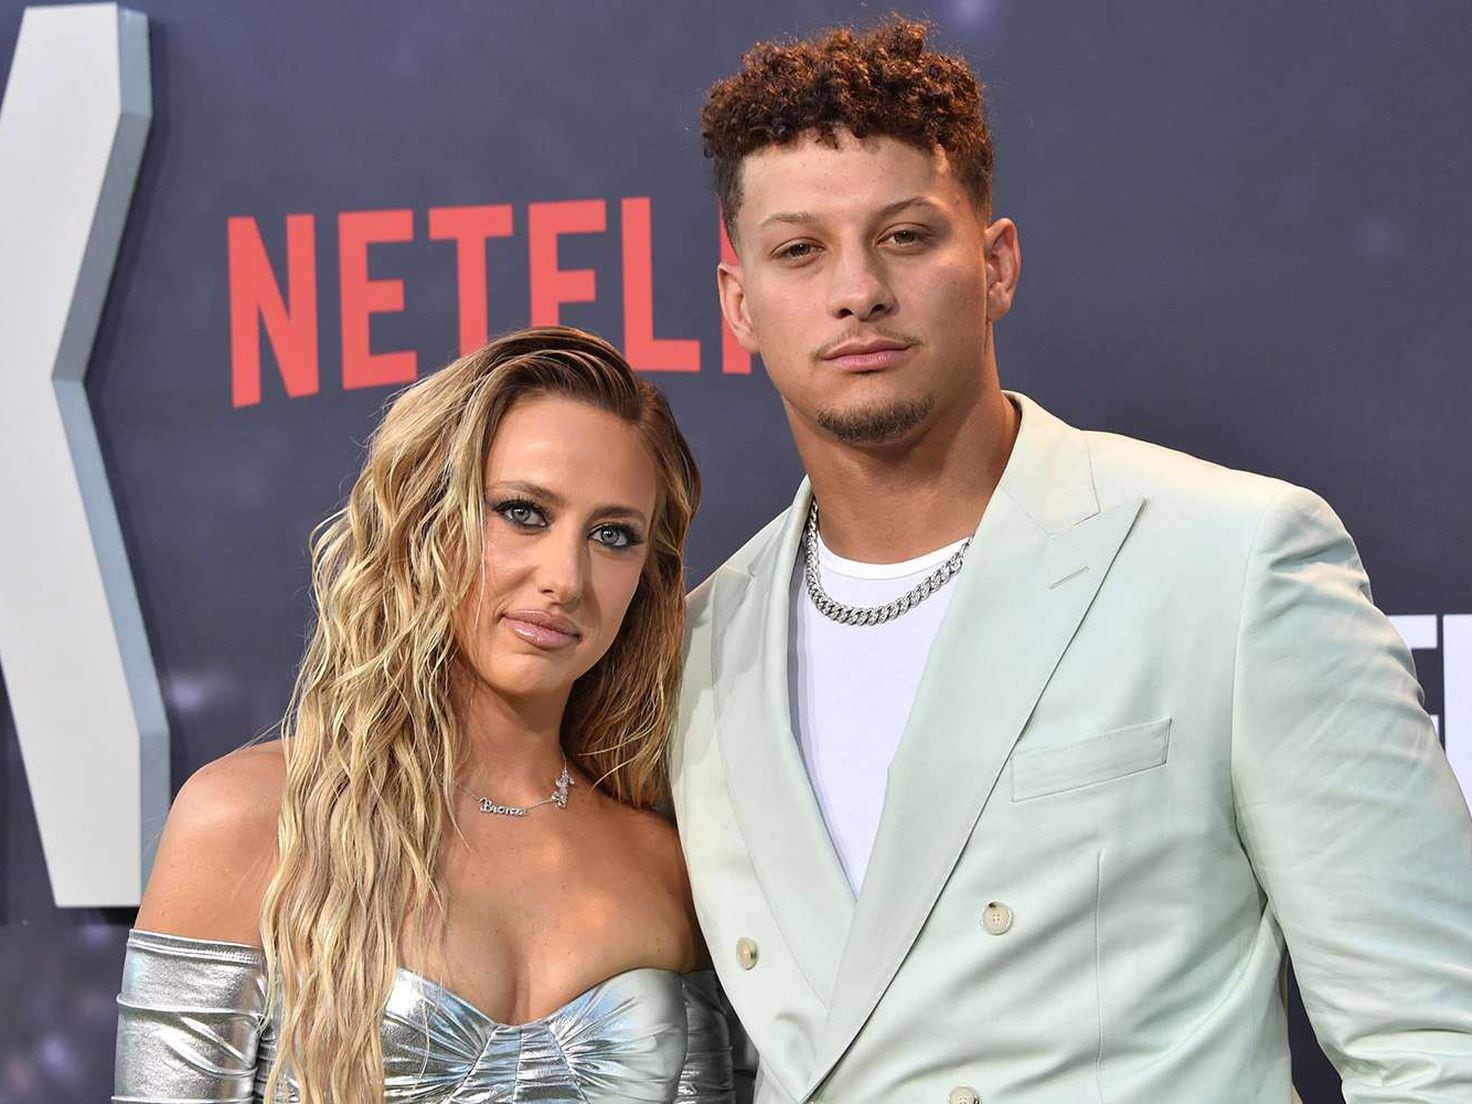 Patrick Mahomes and Brittany are living the best of their family